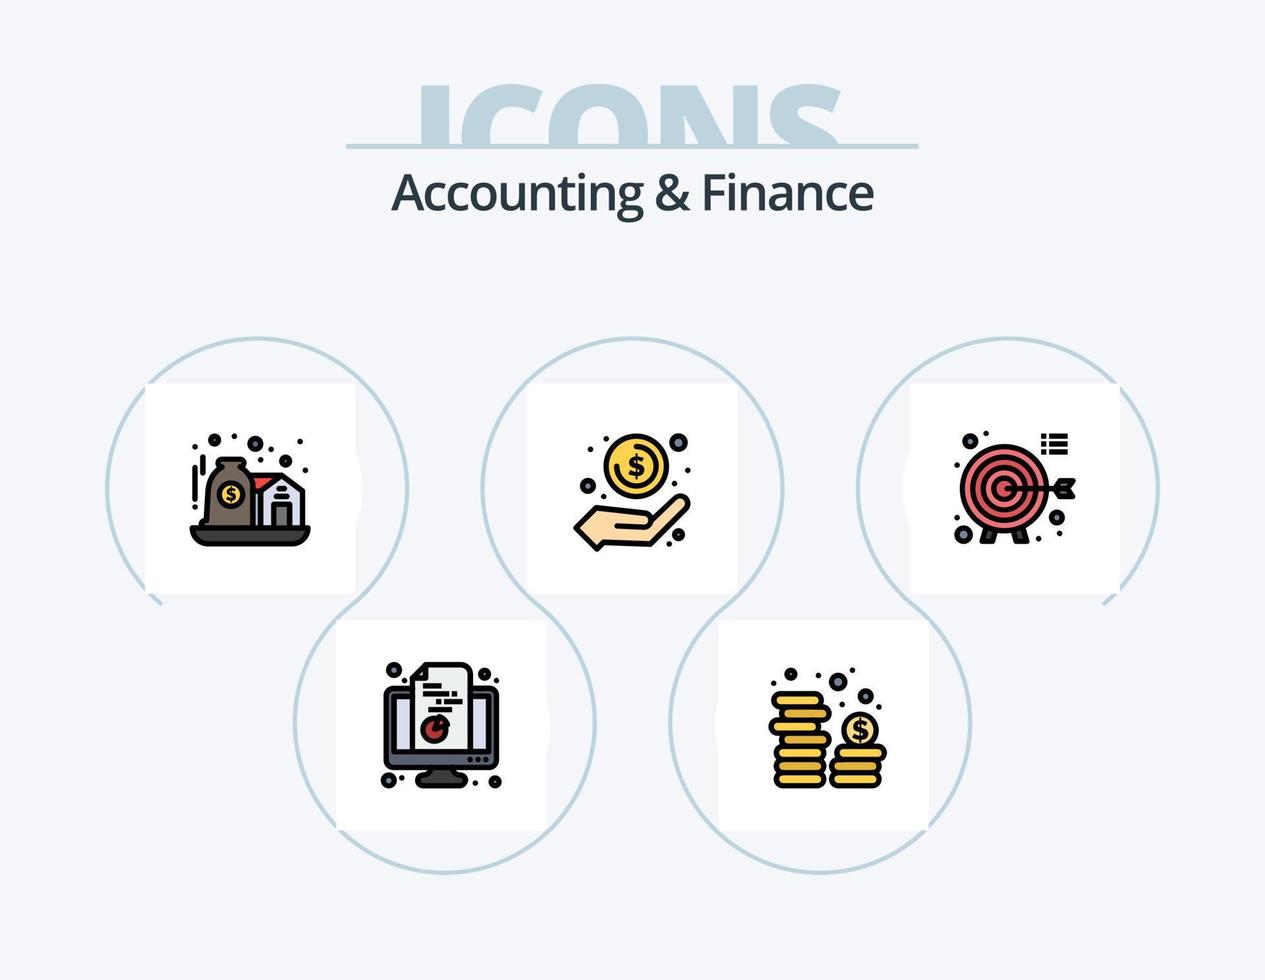 Accounting And Finance Line Filled Icon Pack 5 Icon Design. certificate. investment. secure. home. money vector